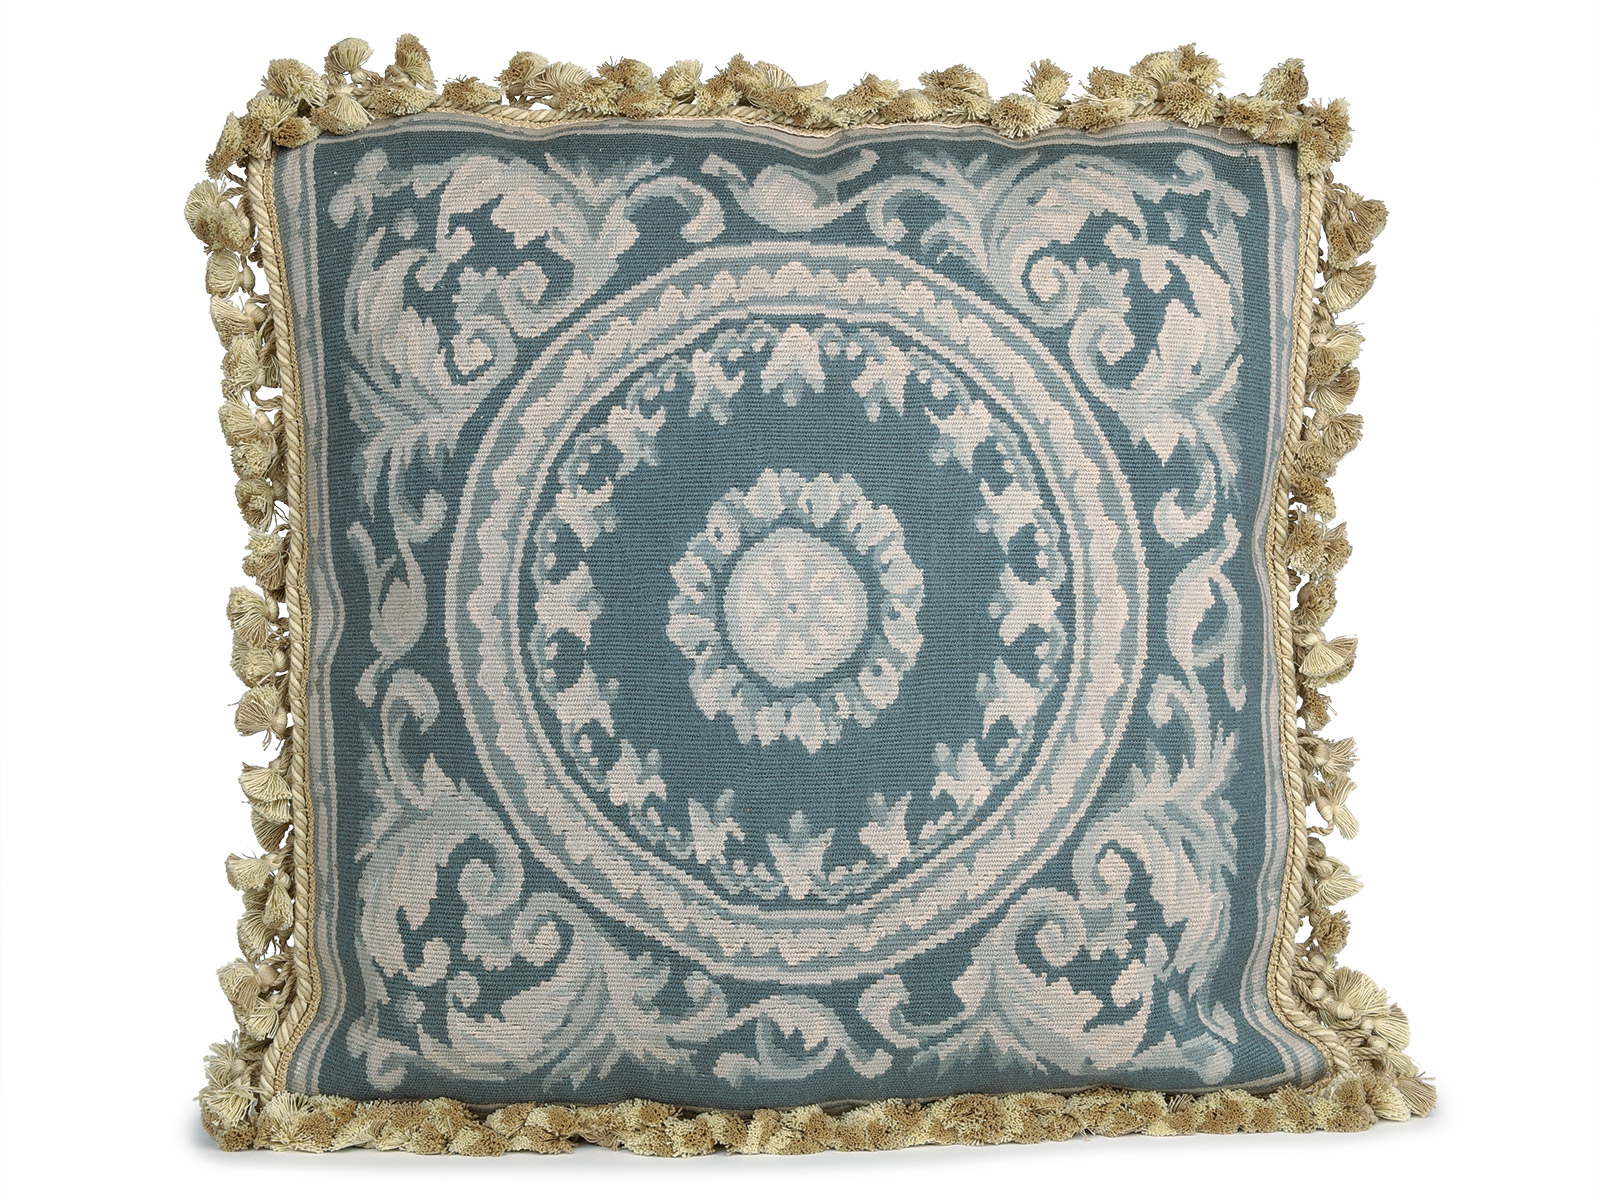 IMAGE OF CELESTIAL TAPESTRY PILLOW